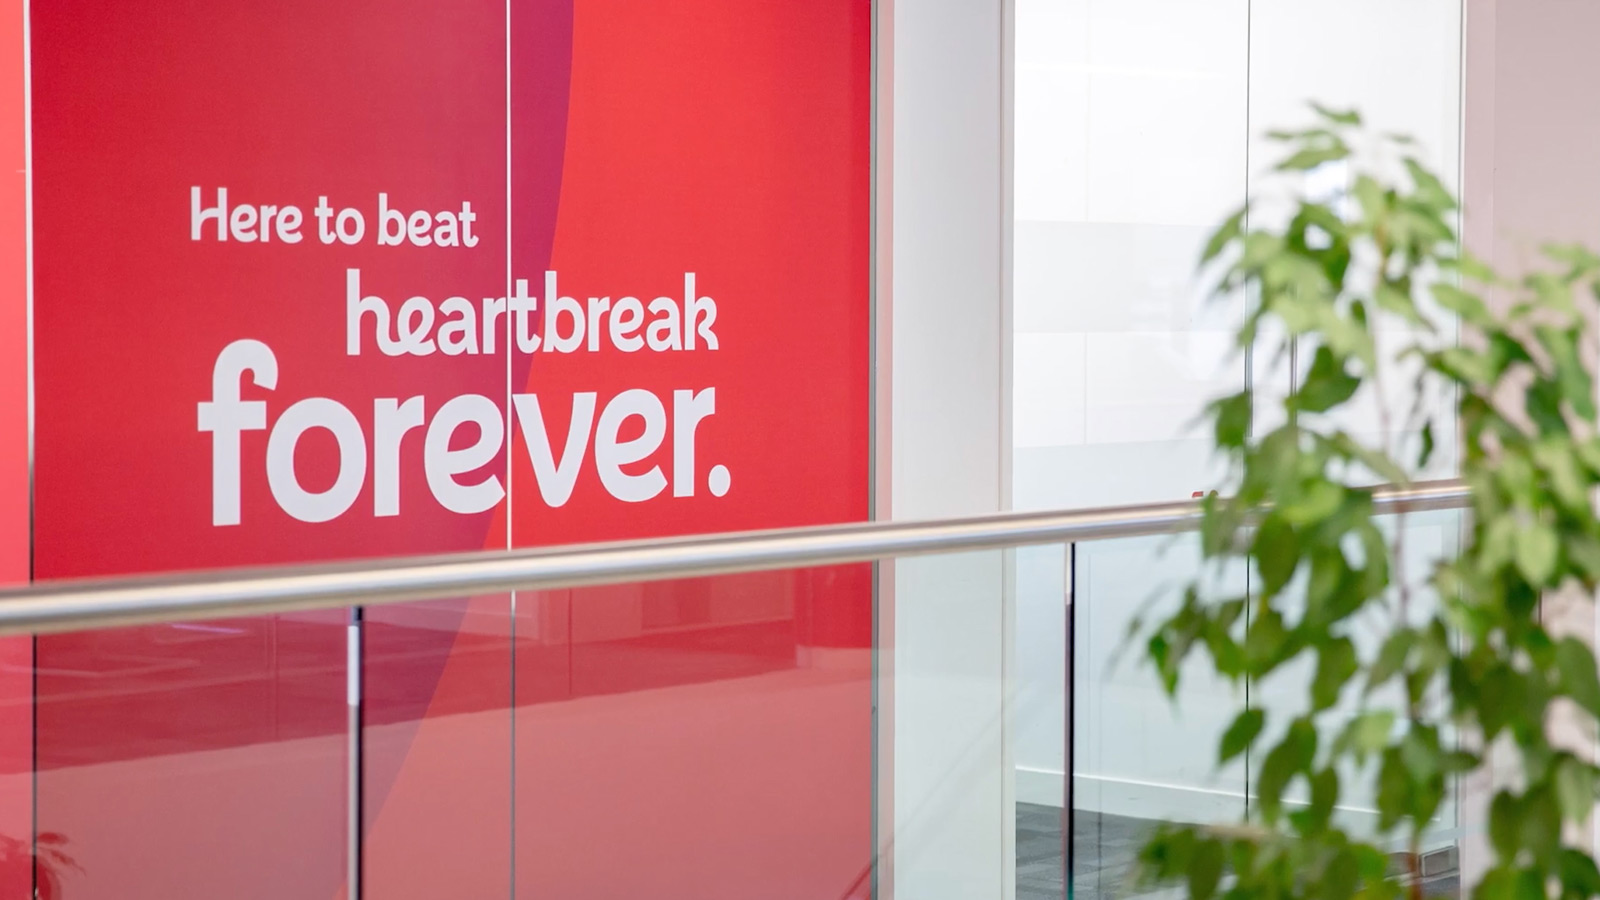 British Heart Foundation pumps new life into its HR system.